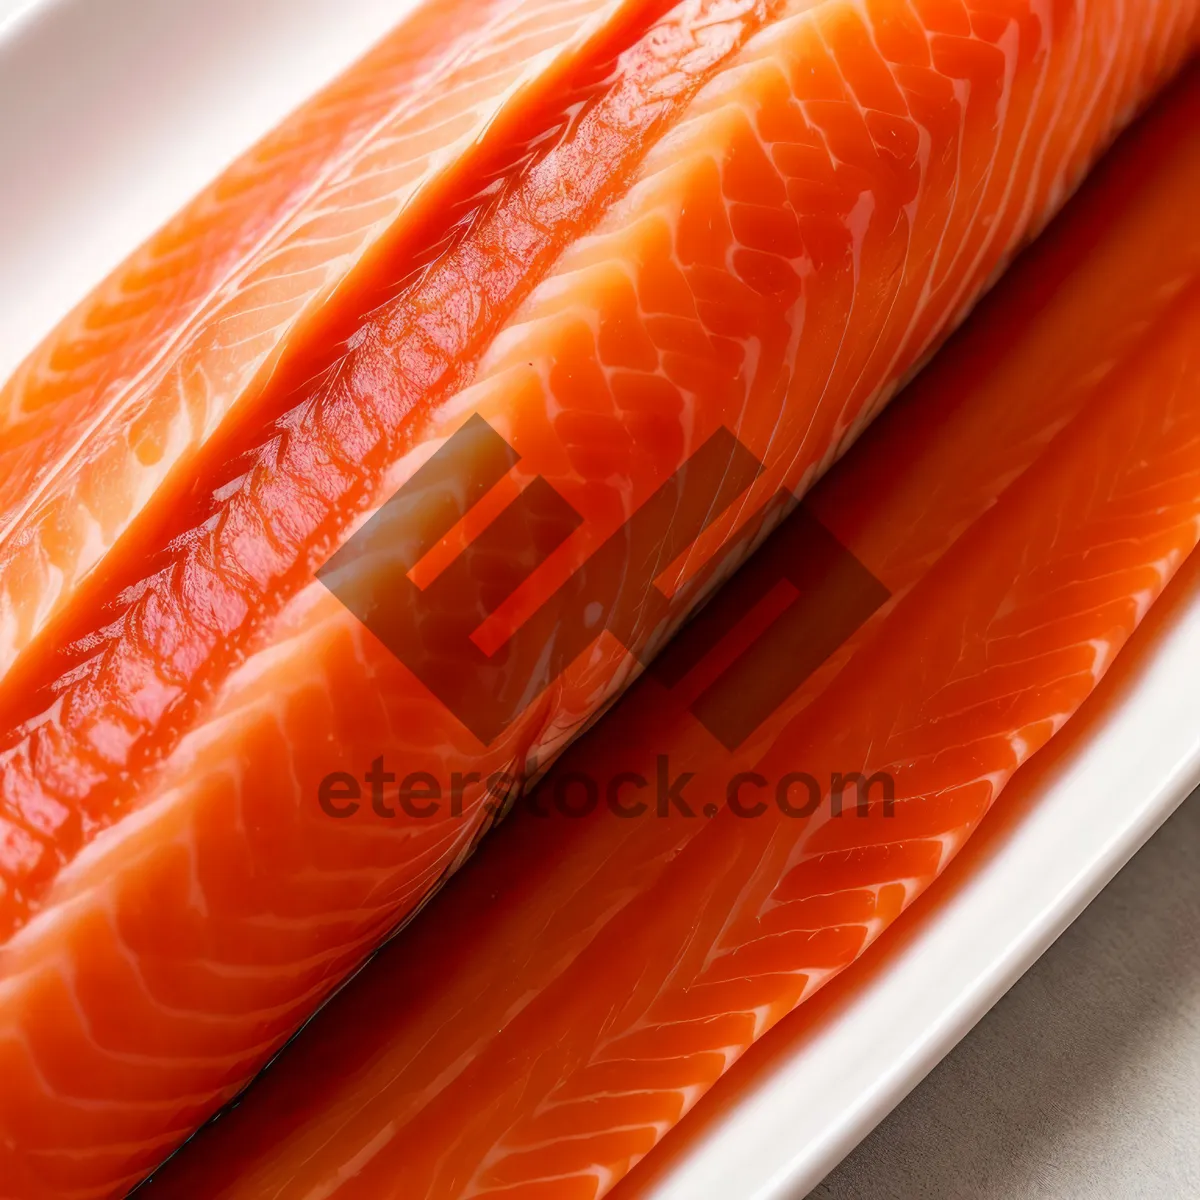 Picture of Freshly Sliced Salmon and Carrot Gourmet Plate